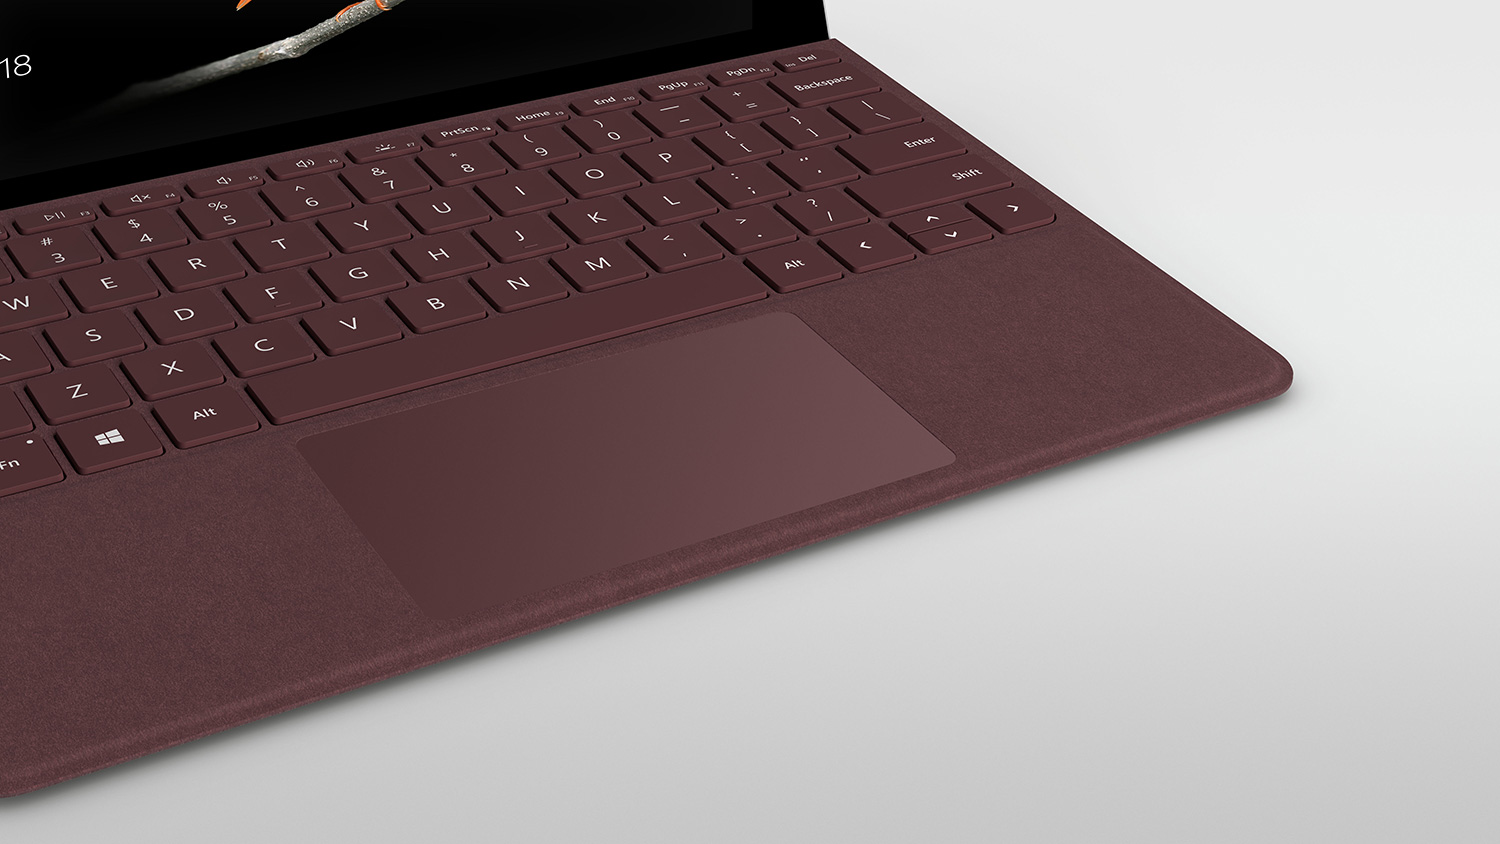 Microsoft Surface Go officially launches in Singapore